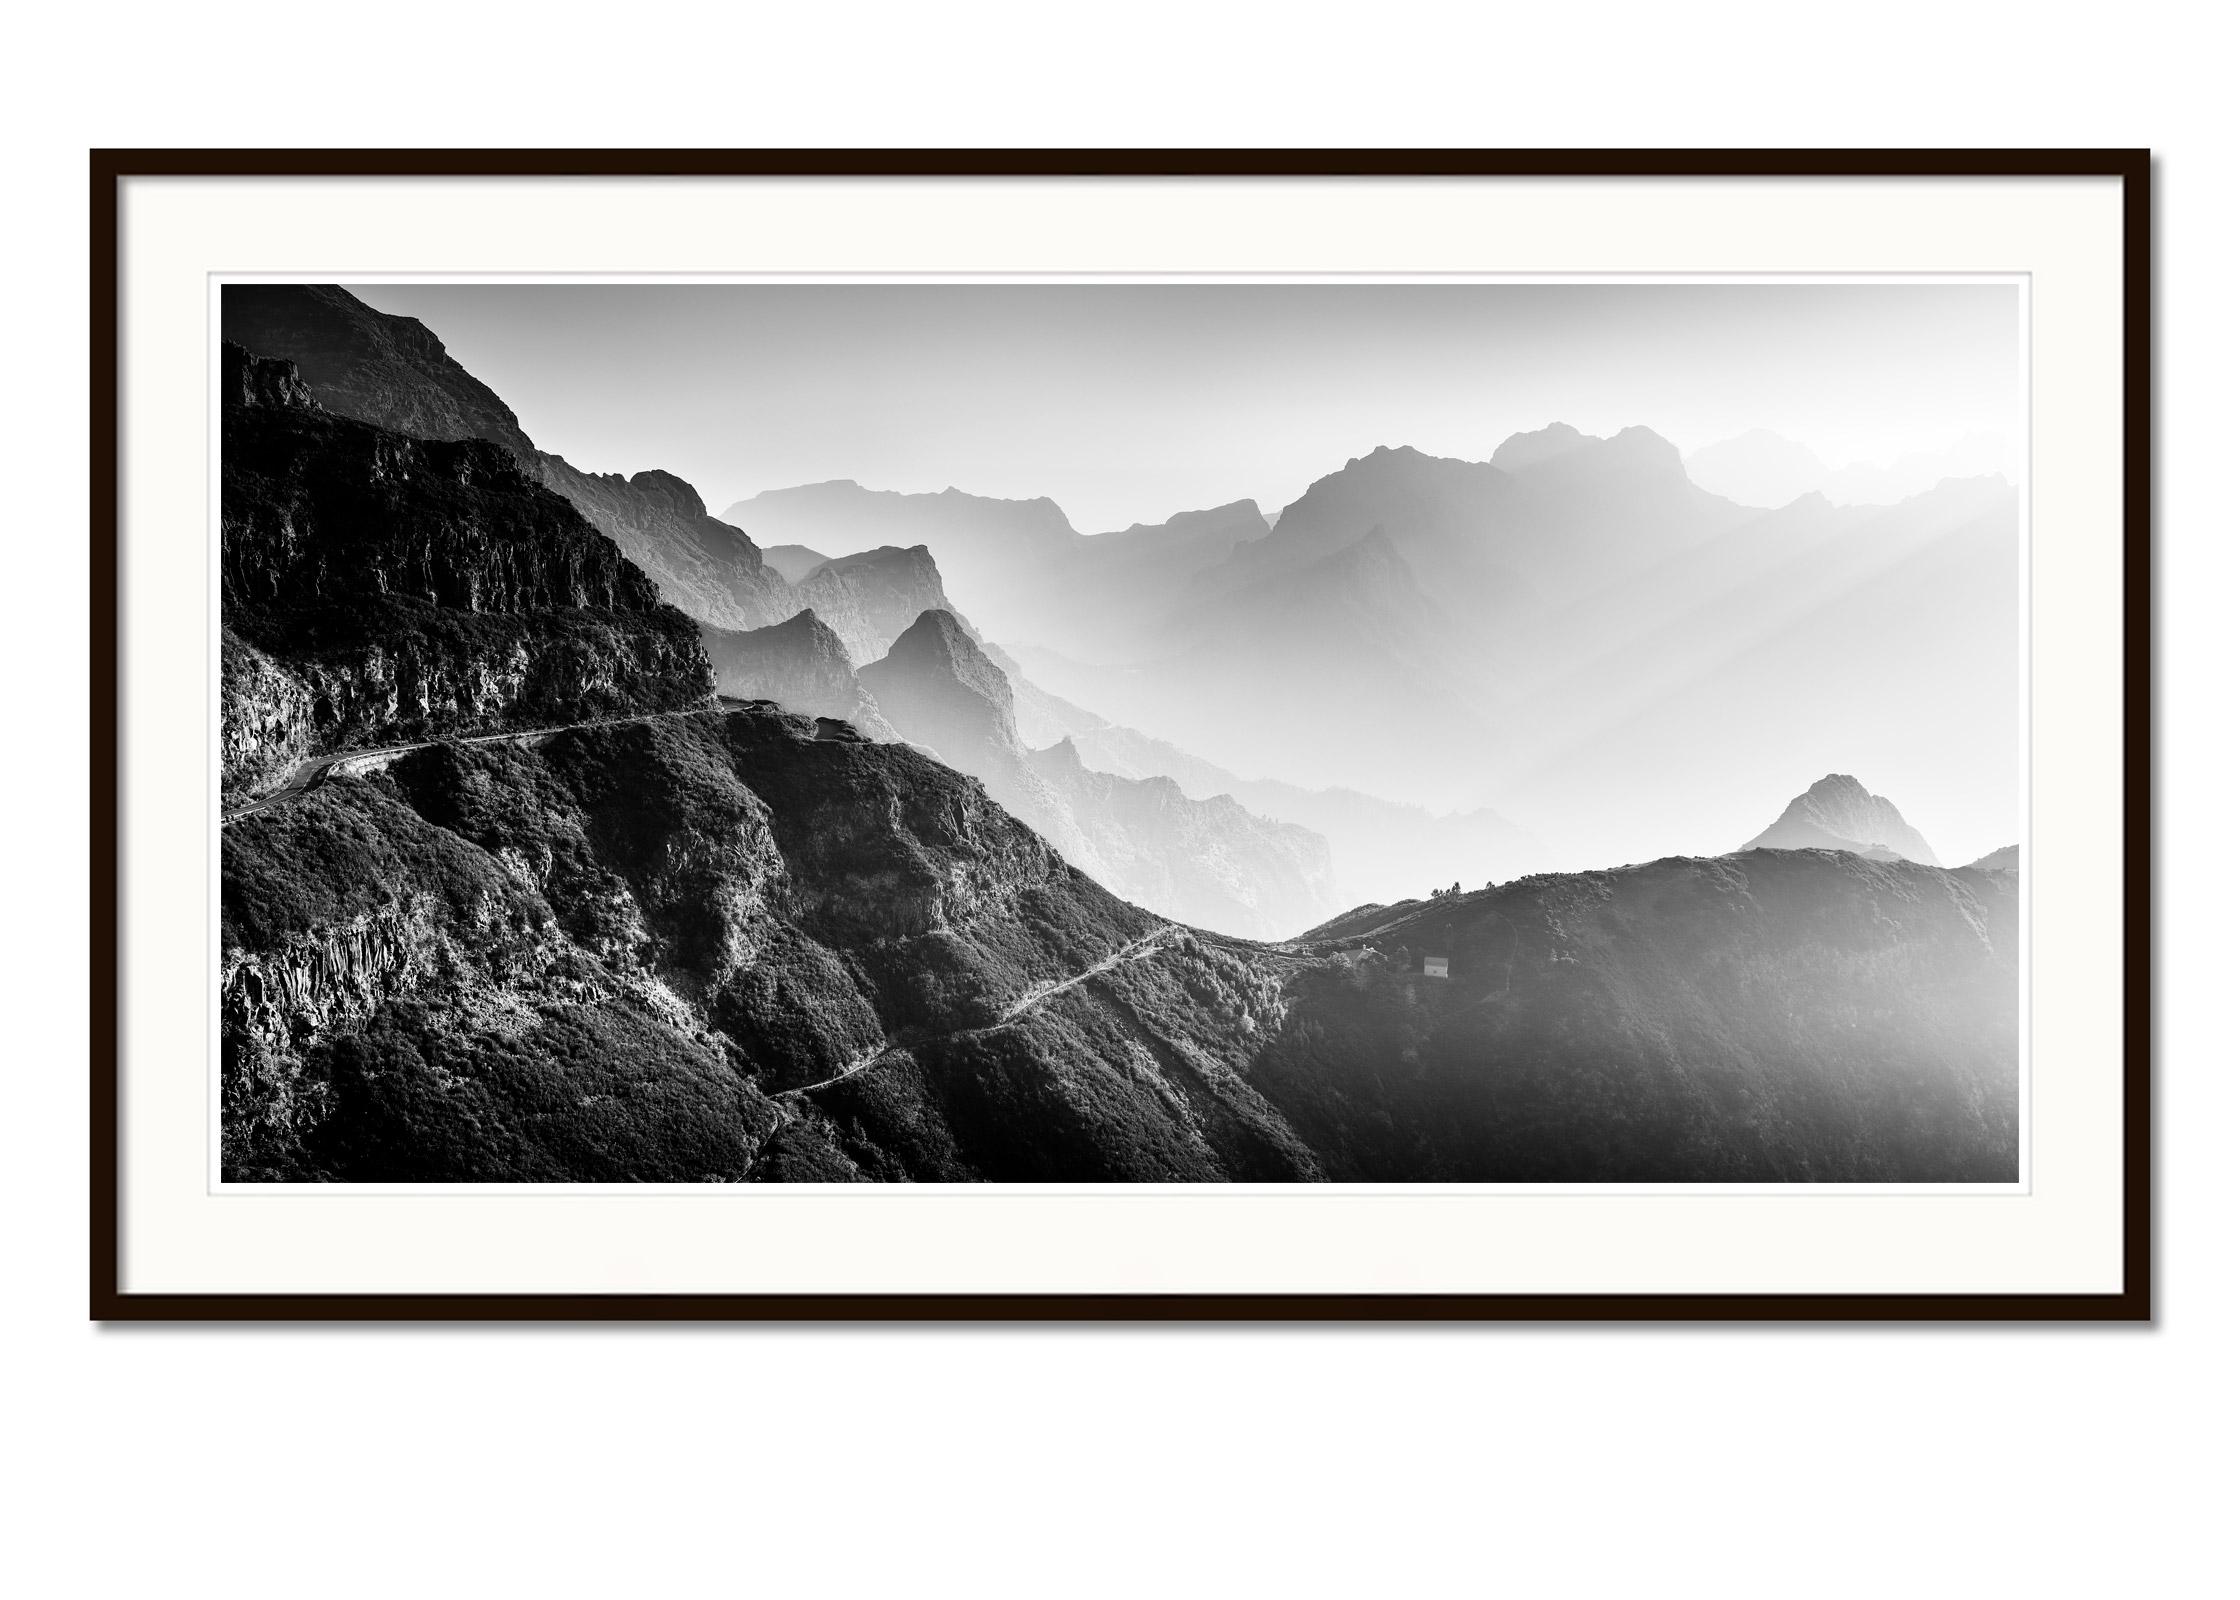 Black and white fine art panorama landscape photography print. Madeira's mountain peaks in the wonderful light at sunrise, Portugal. Archival pigment ink print, edition of 5. Signed, titled, dated and numbered by artist. Certificate of authenticity